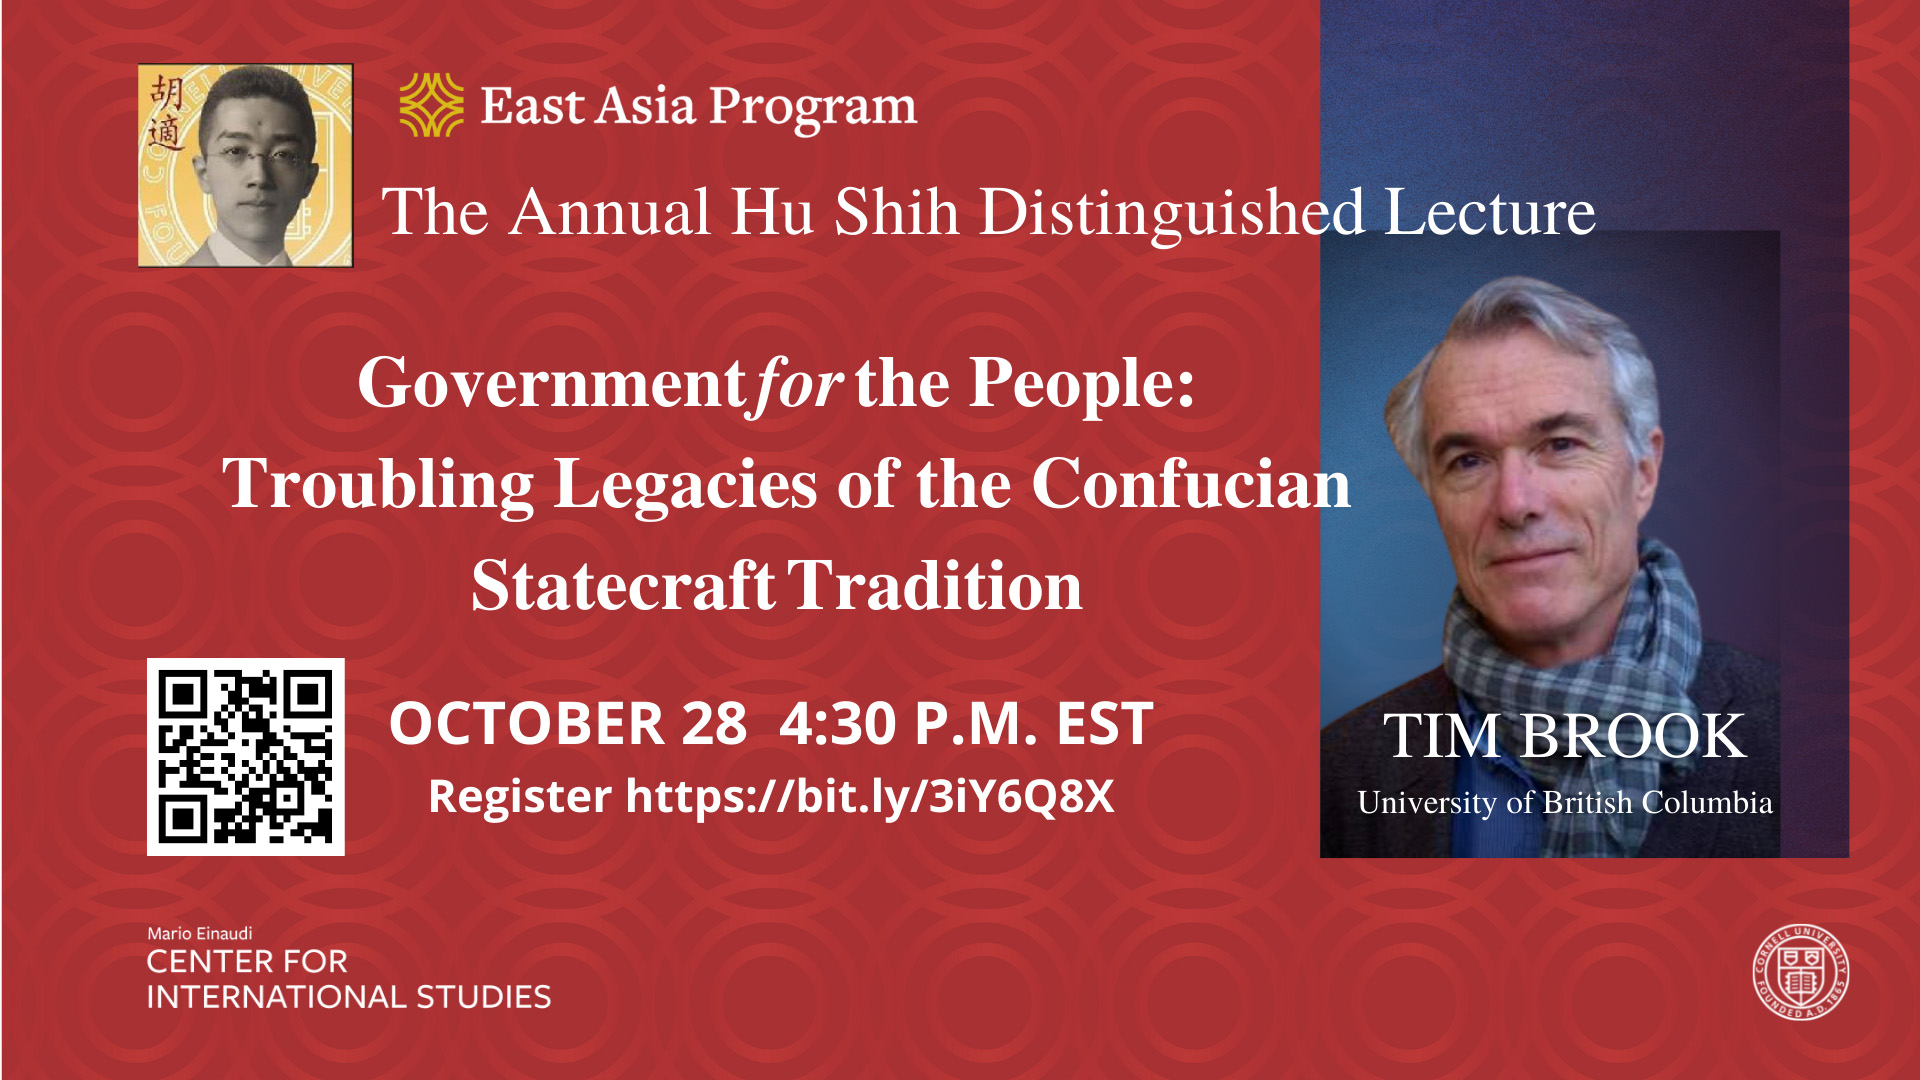 Poster for the Annual Hu Shih Distinguished Lecture with portrait of Hu Shih and speaker Tim Brook